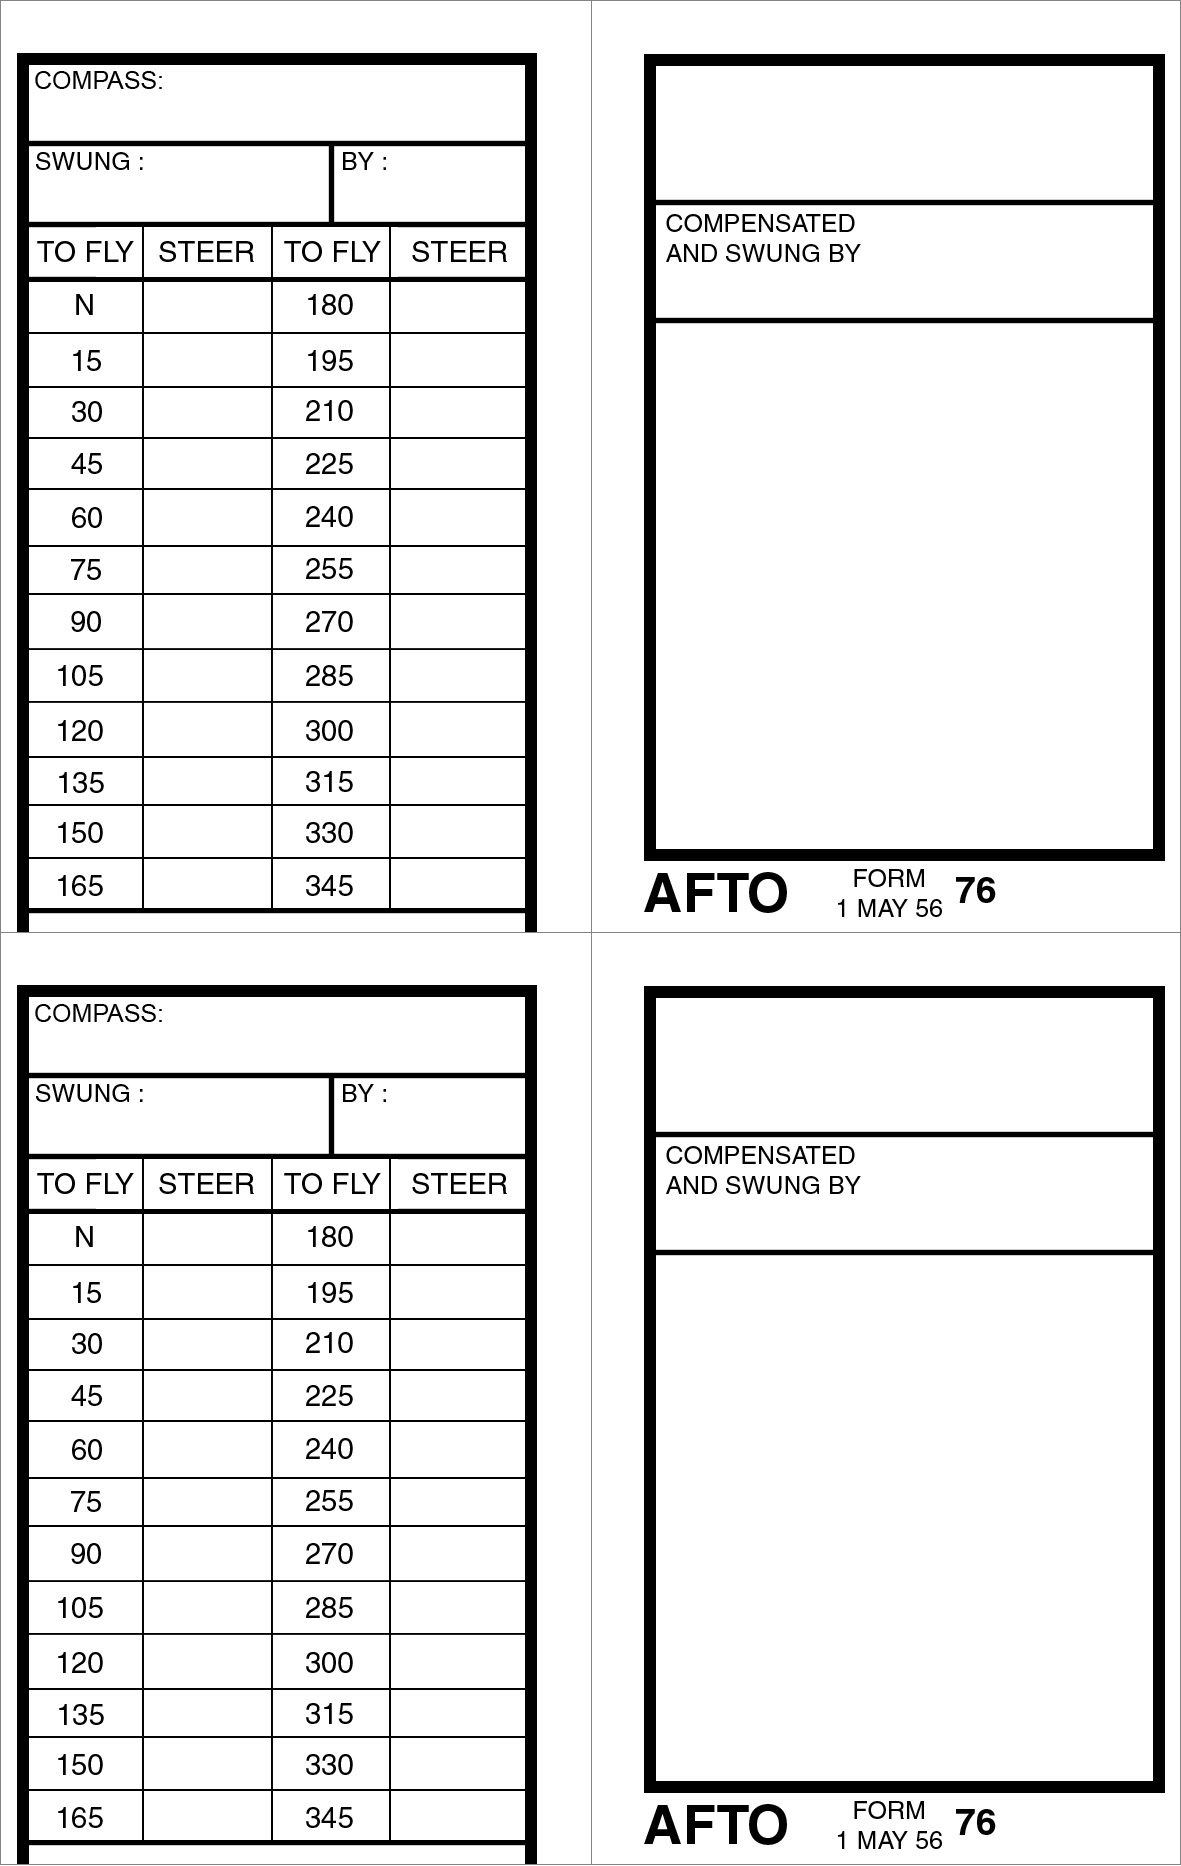 Compass Deviation Card Template Within Compass Deviation Card Template